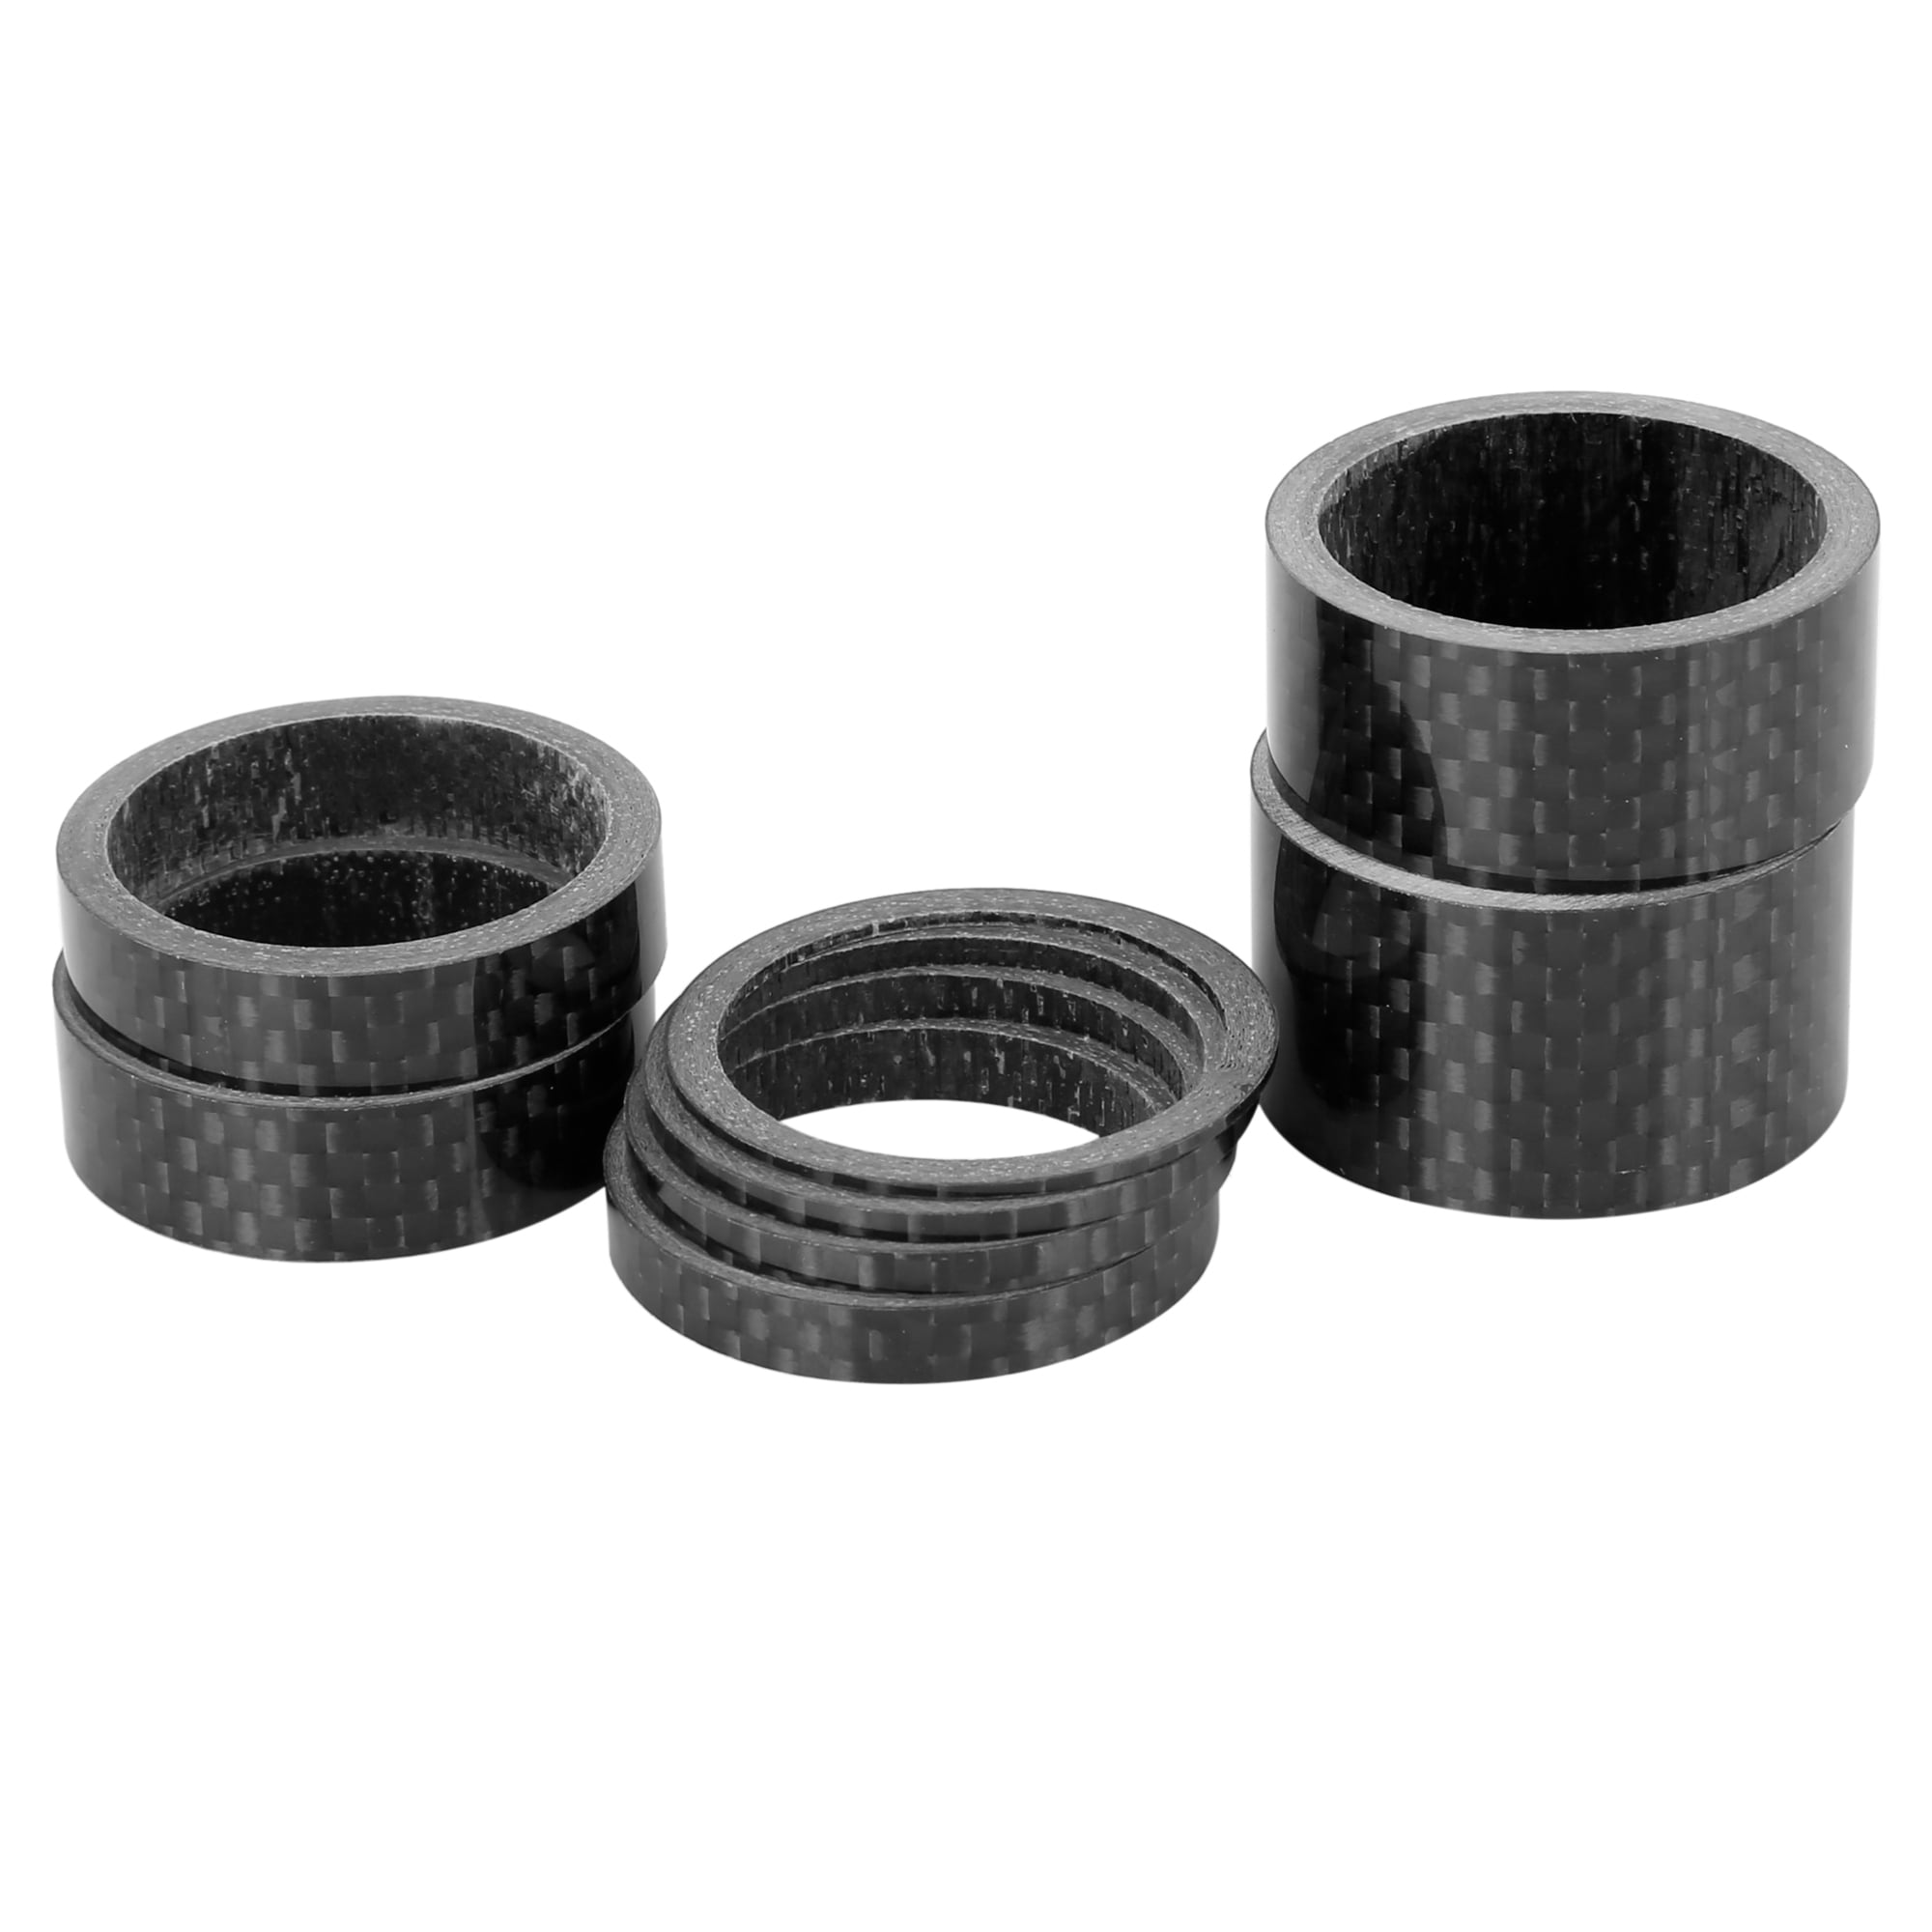 /'20 mm Full Carbon Headset Spacer 1-1//8 Tapered